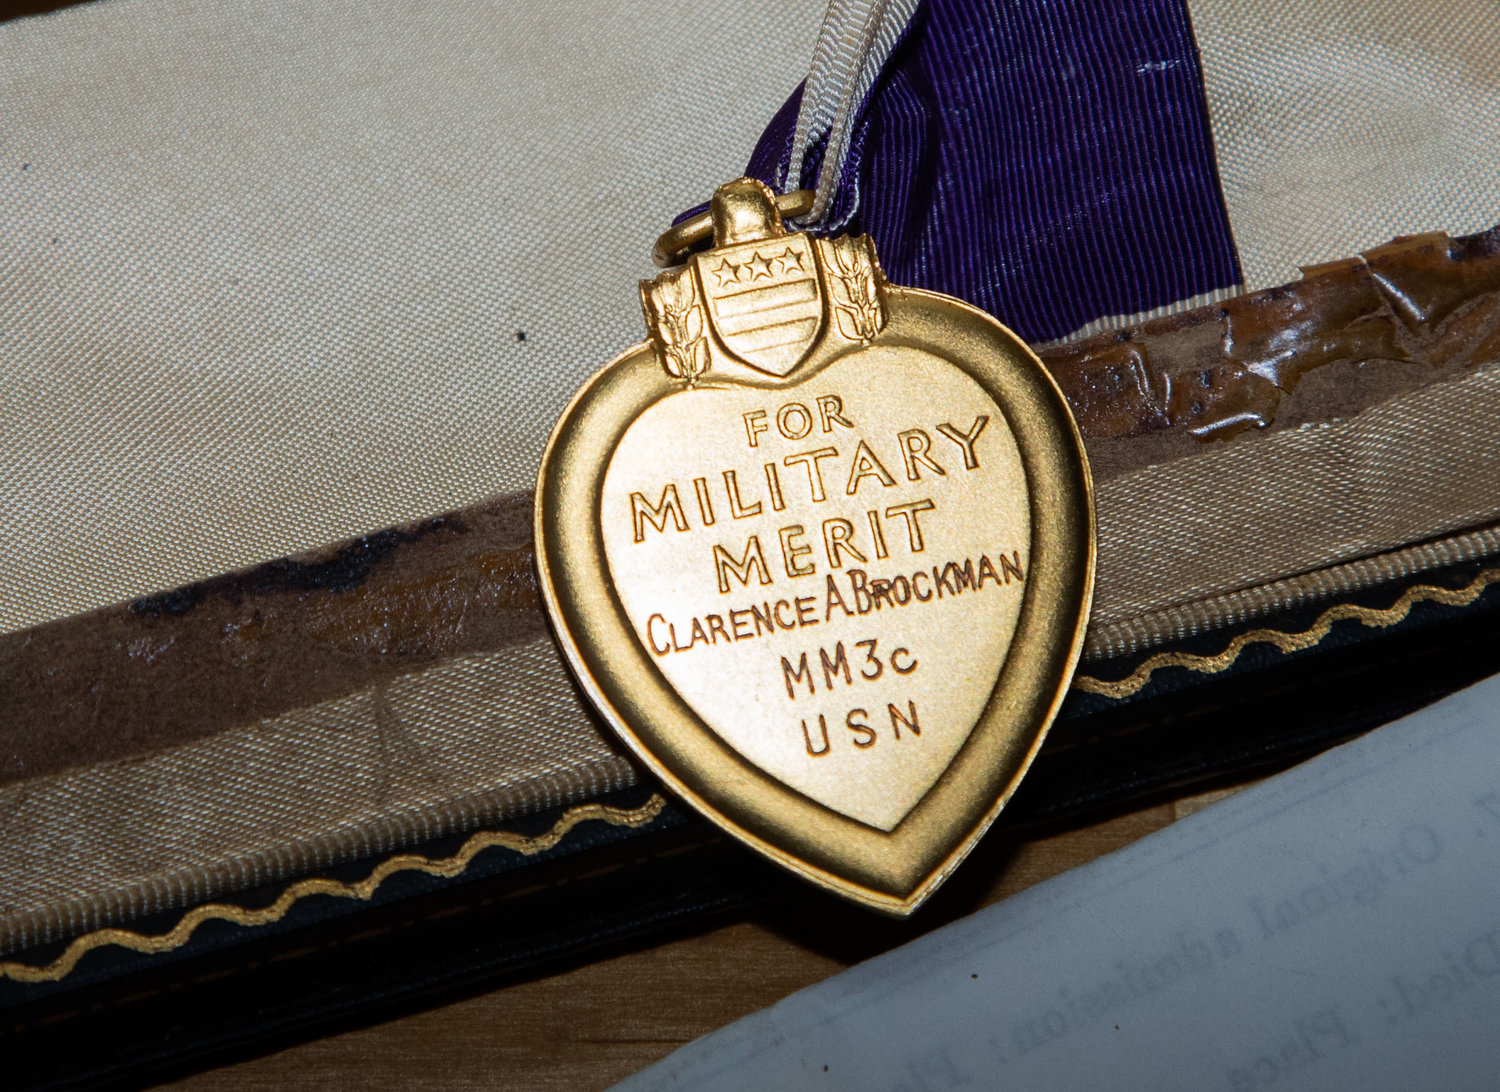 Clarence Brockman’s purple heart is one of many items cherished by his nephew, Dale Brockman of Paris. Clarence Brockman was the second Randolph County resident killed on the USS Houston during World War II, taking a backseat to Ira Bailey who is remembered as the first.